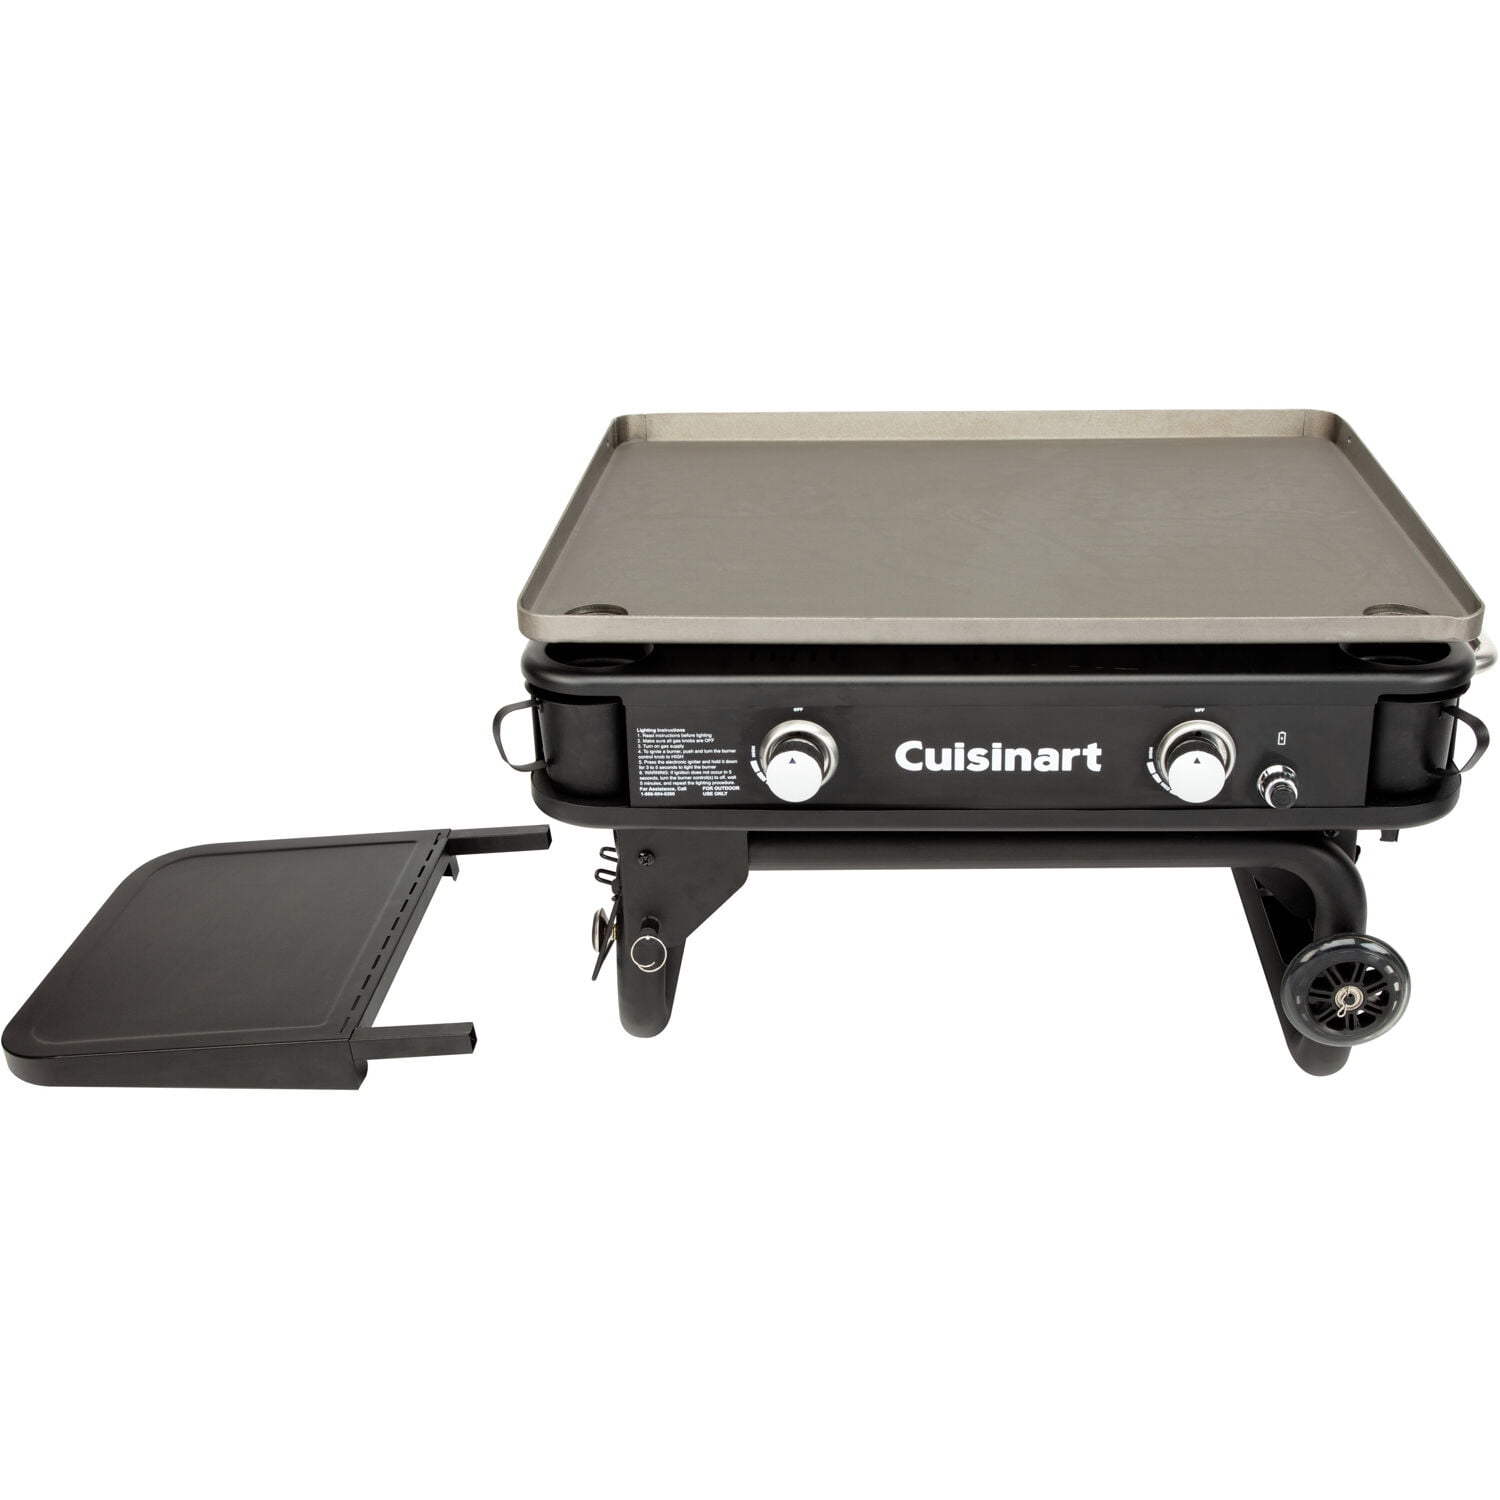 Cuisinart's 22-inch round flat top grill falls to lowest price in over a  year at $243.50 (Reg. $300)